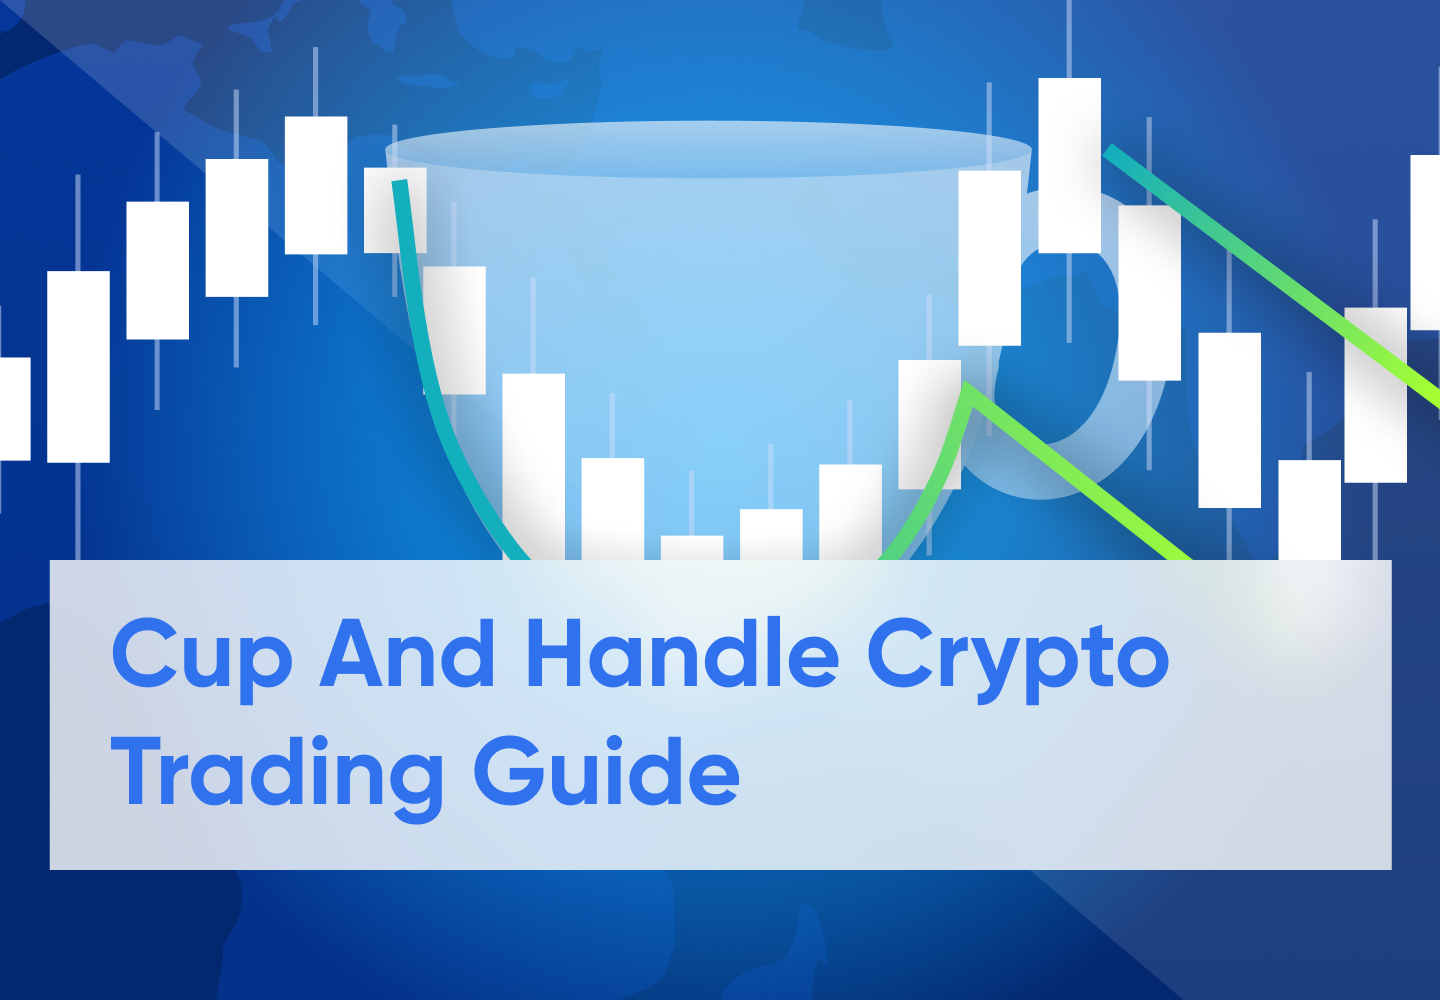 What Is a Cup And Handle?